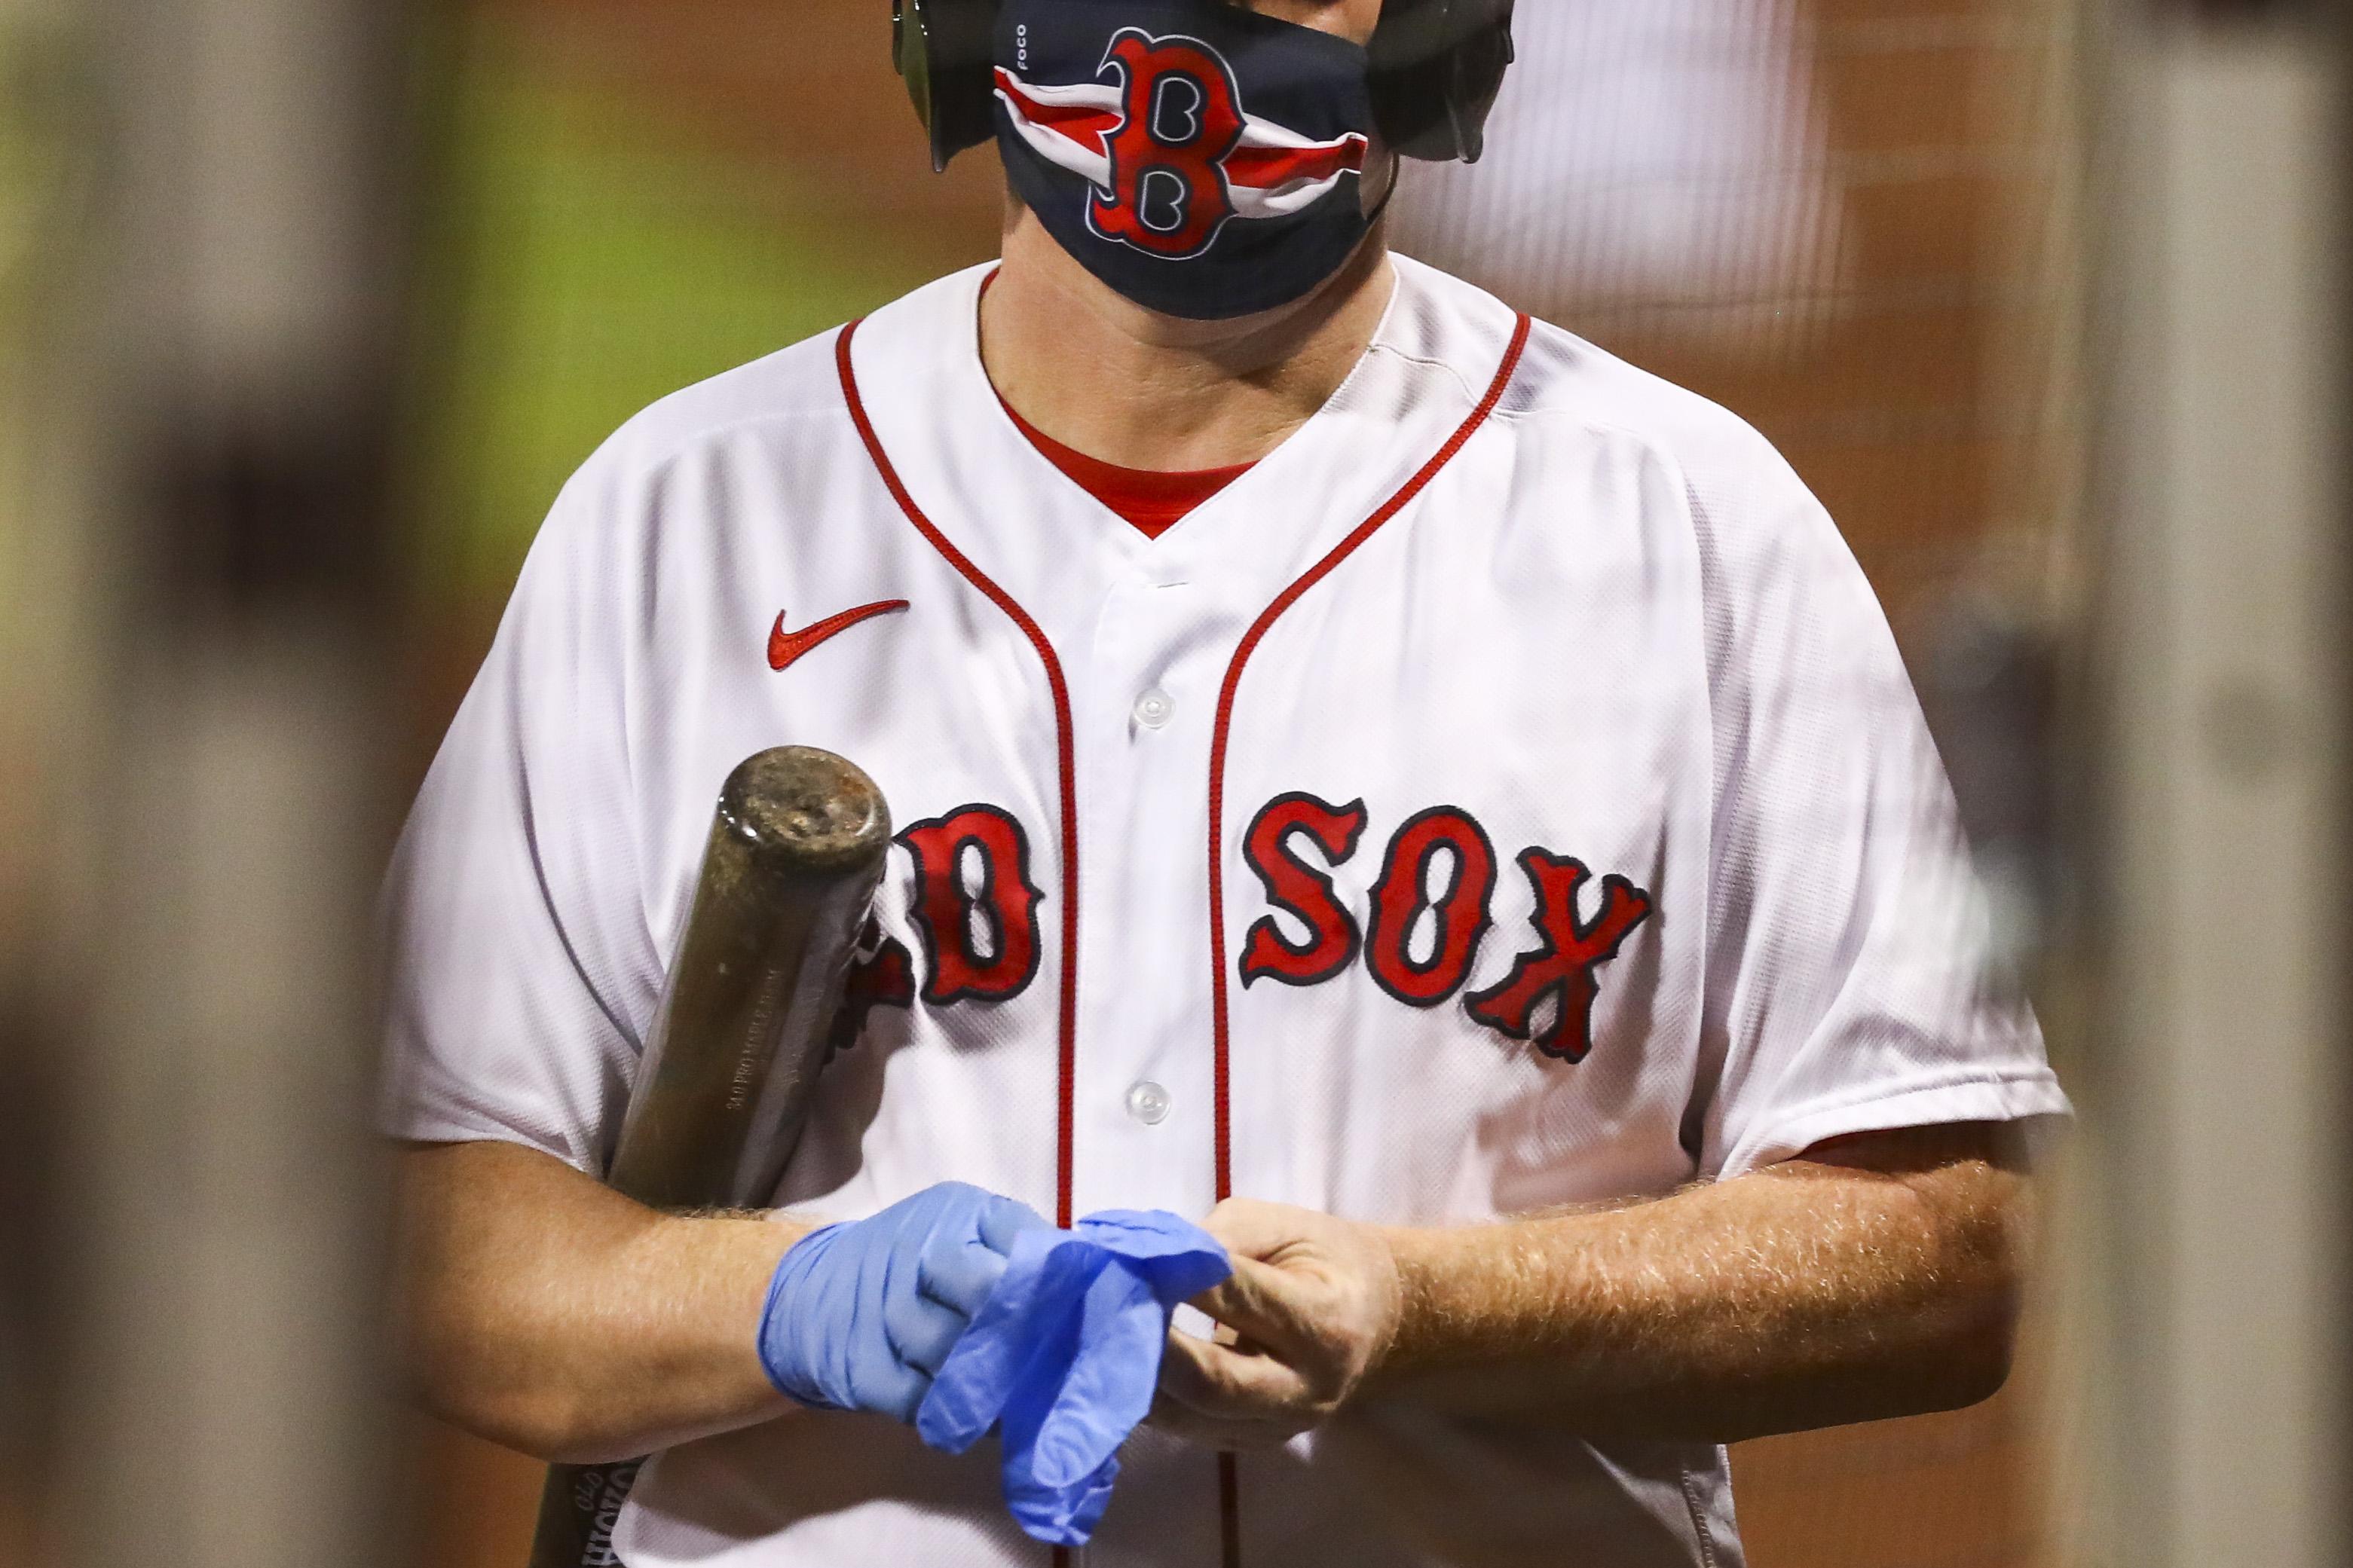 BOSTON, MA - JULY 28: The ball boy wears a protective face mask as he puts on medical latex gloves during the sixth inning of a game between the Boston Red Sox and the New York Mets at Fenway Park on July 28, 2020 in Boston, Massachusetts. 